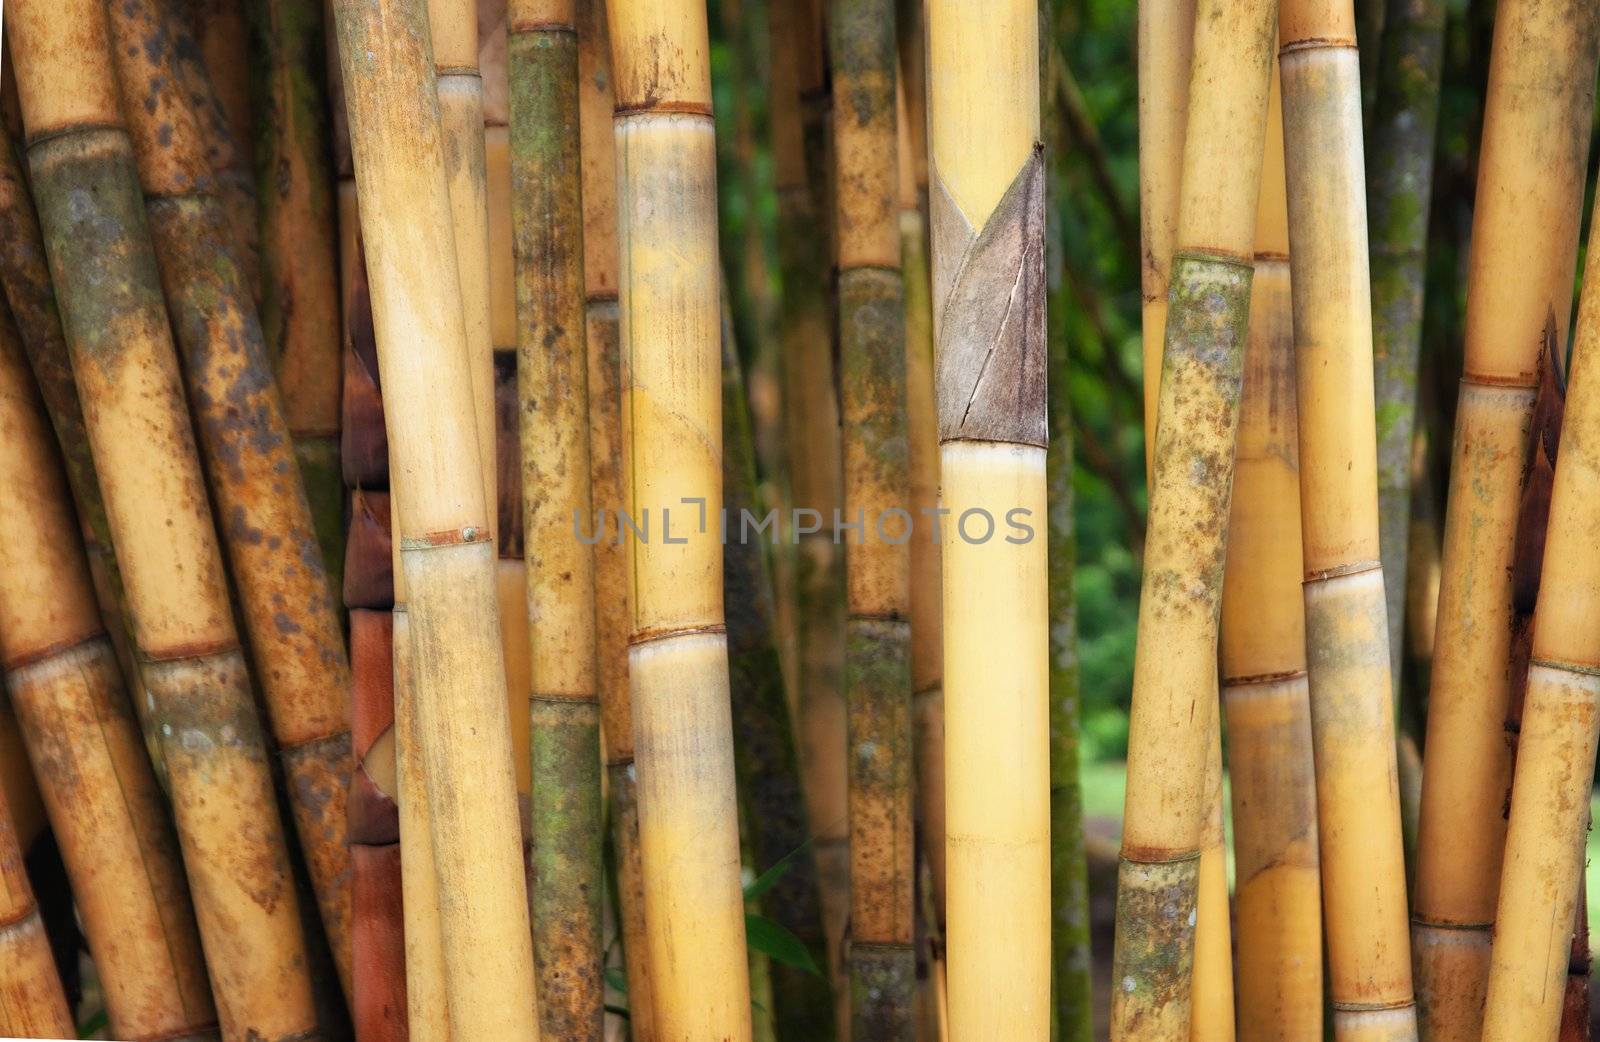 some tall yellow bamboo plants in singapore